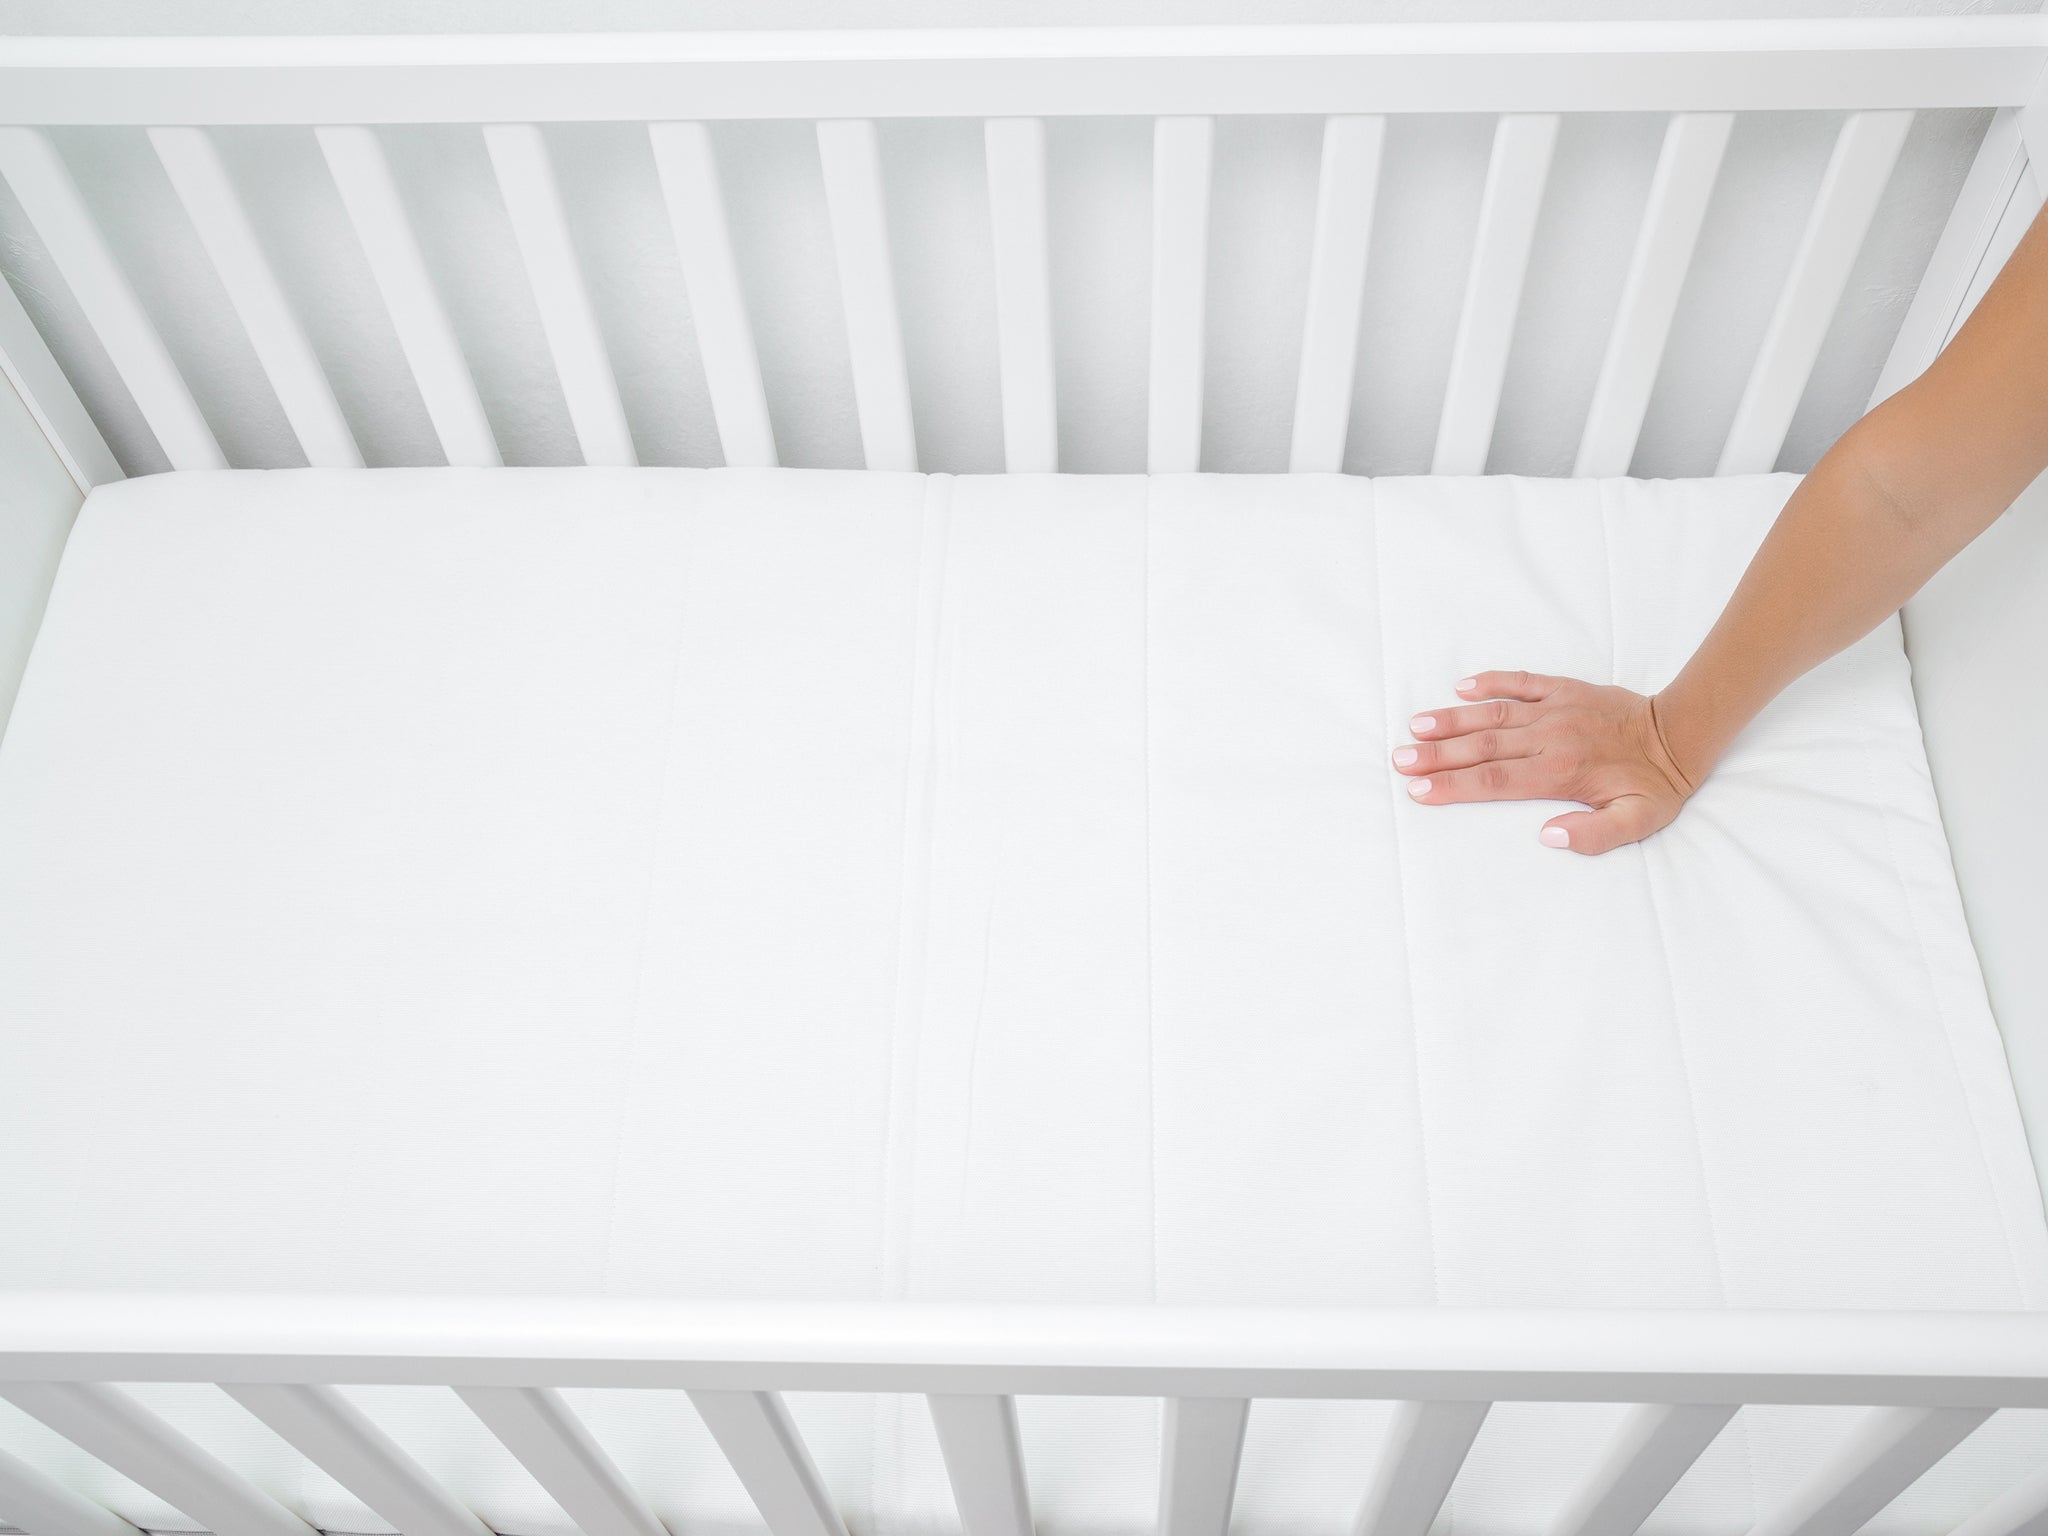 Bear in mind, not all baby beds come with a mattress, so you’ll need to factor that in when considering your budget